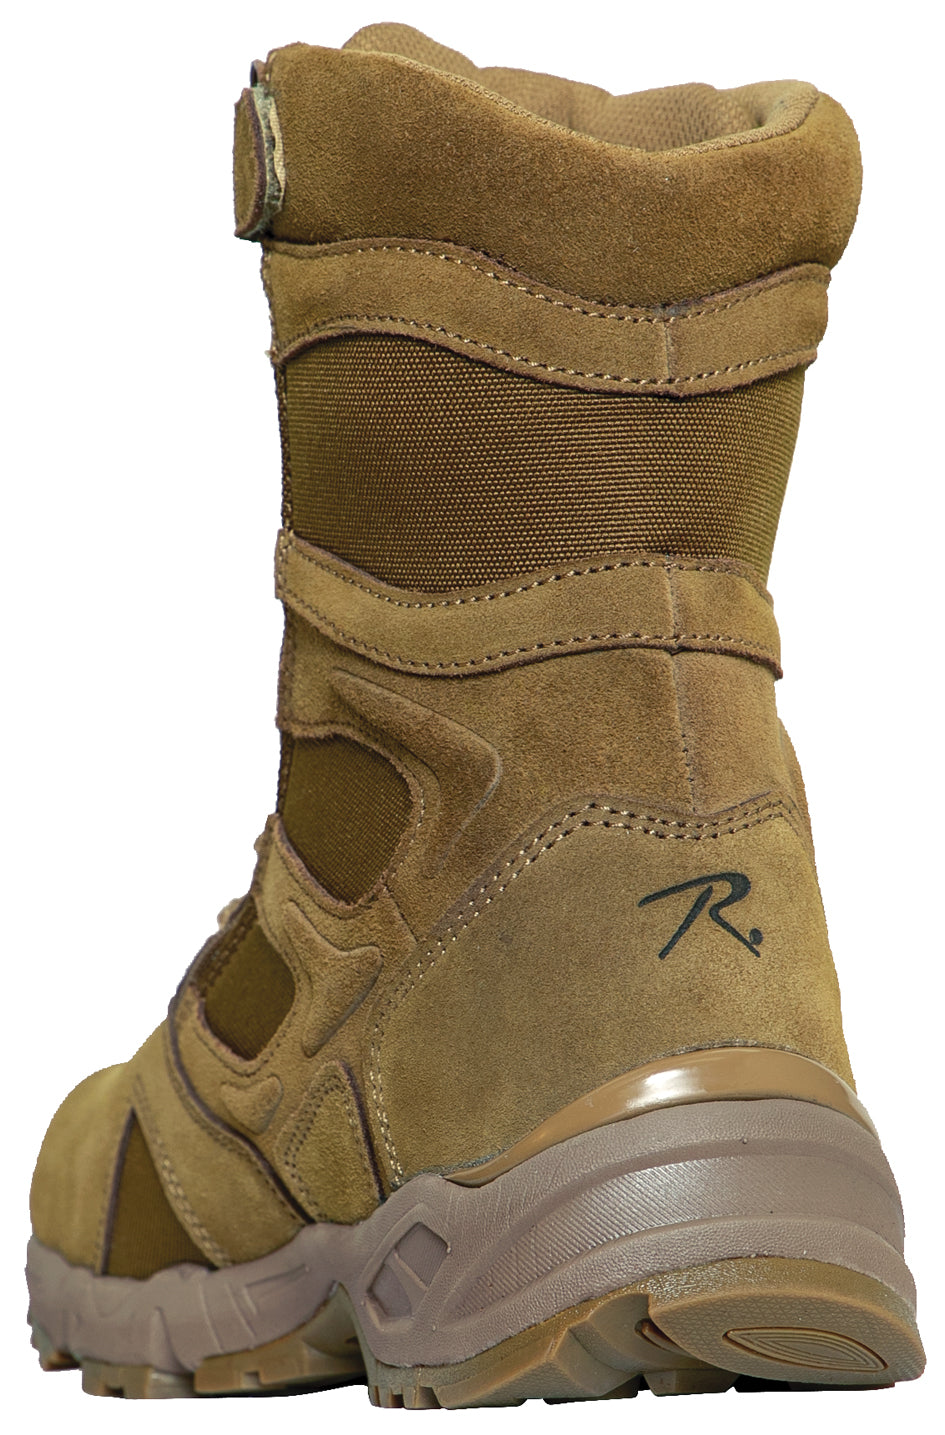 [AR 670-1][Zipper] Forced Entry Deployment Tactical Boots